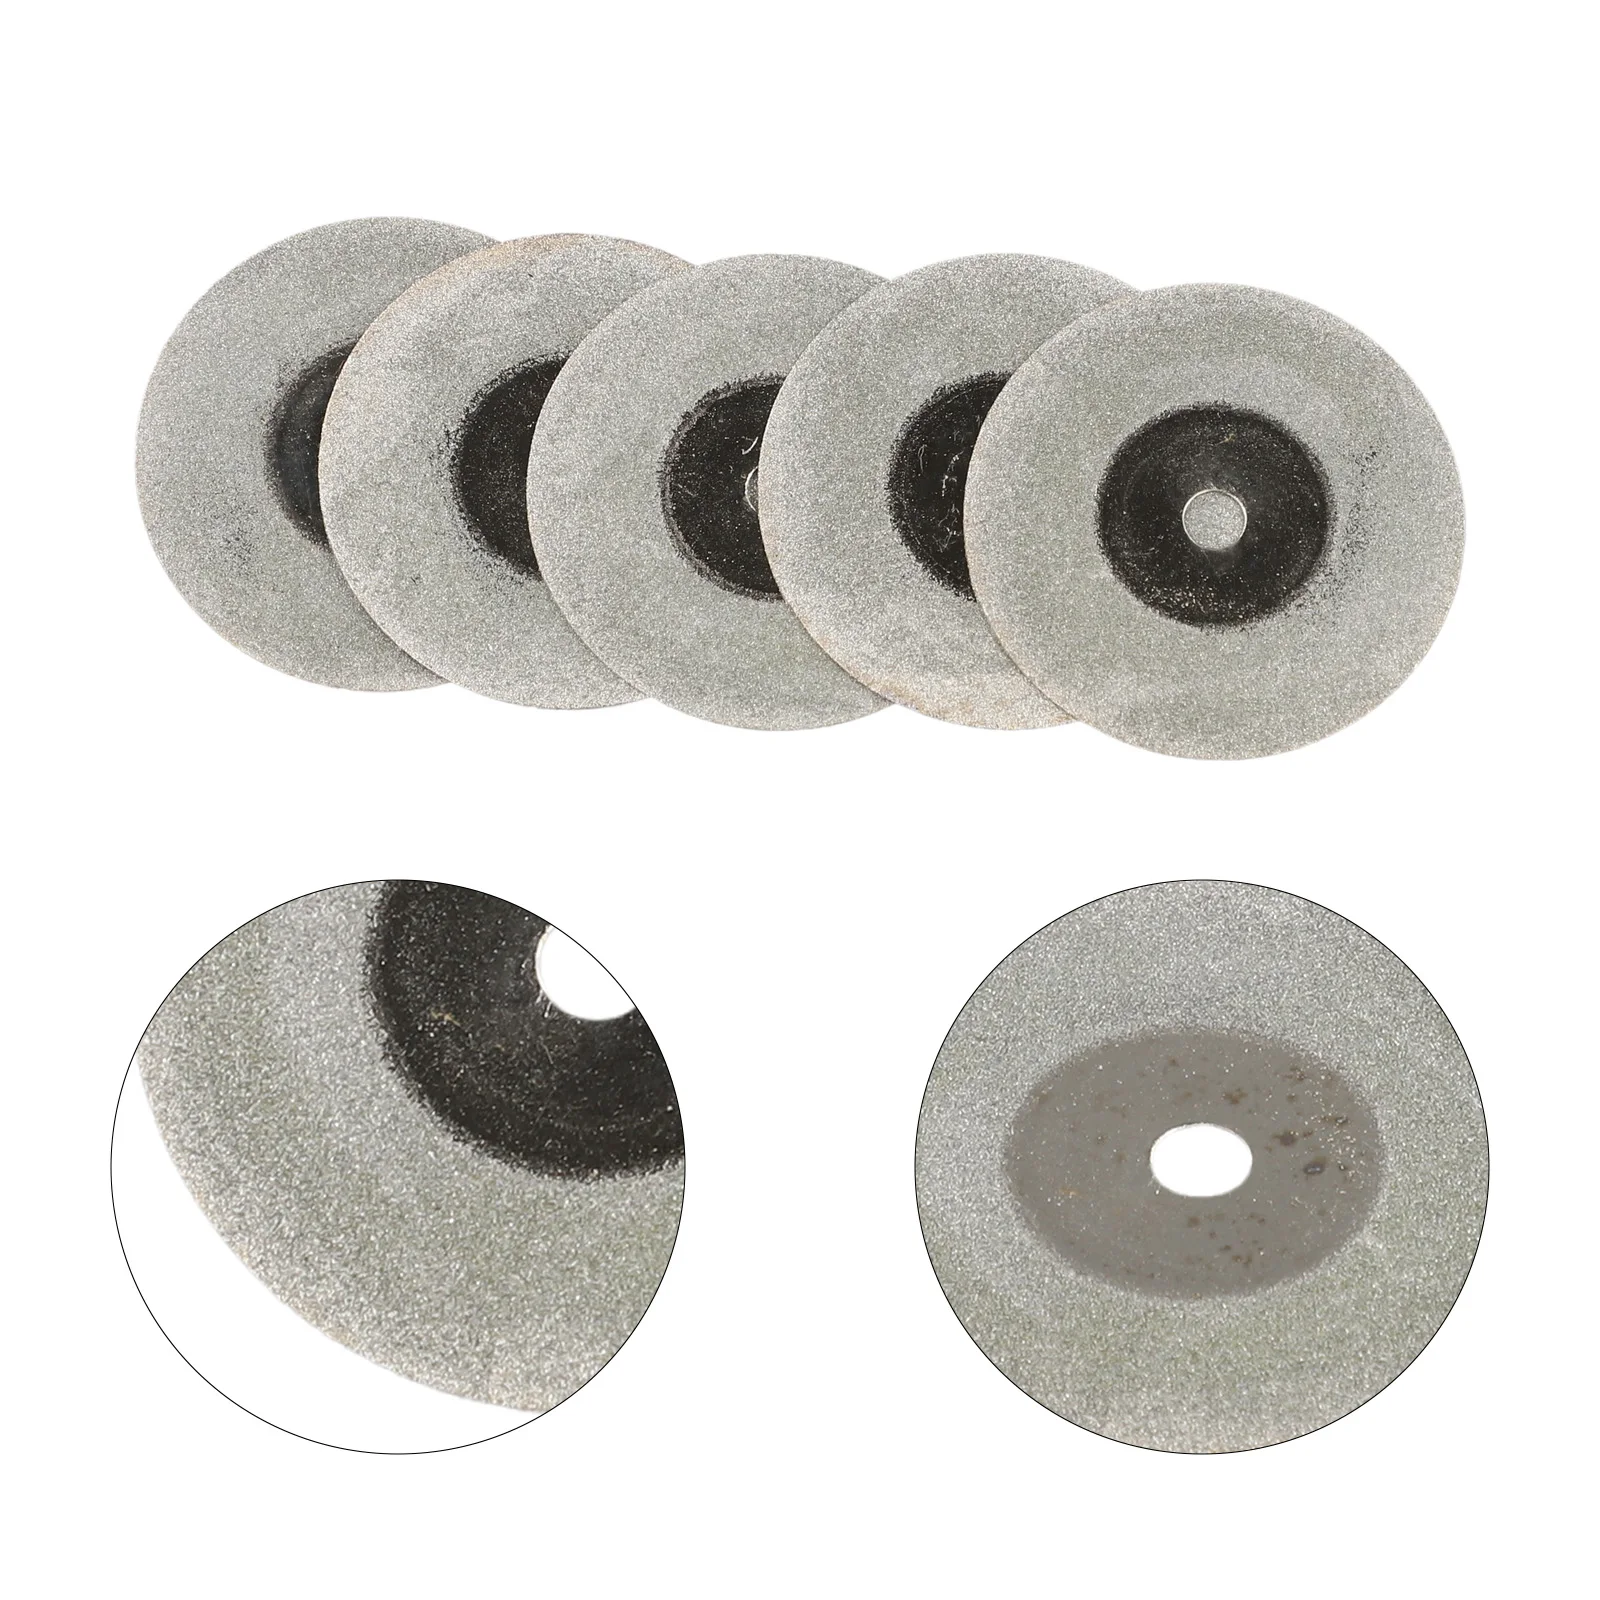 100pcs razor blades safety scraper glue knife glass cleaner replacement carbon steel blade ceramic car labels remover e13 5pcs Cutting Discs 60mm Diamond Saw Blade Cutting Disc Glass Tiles Cutting Blades​ ​power Tools Replacement Accessories